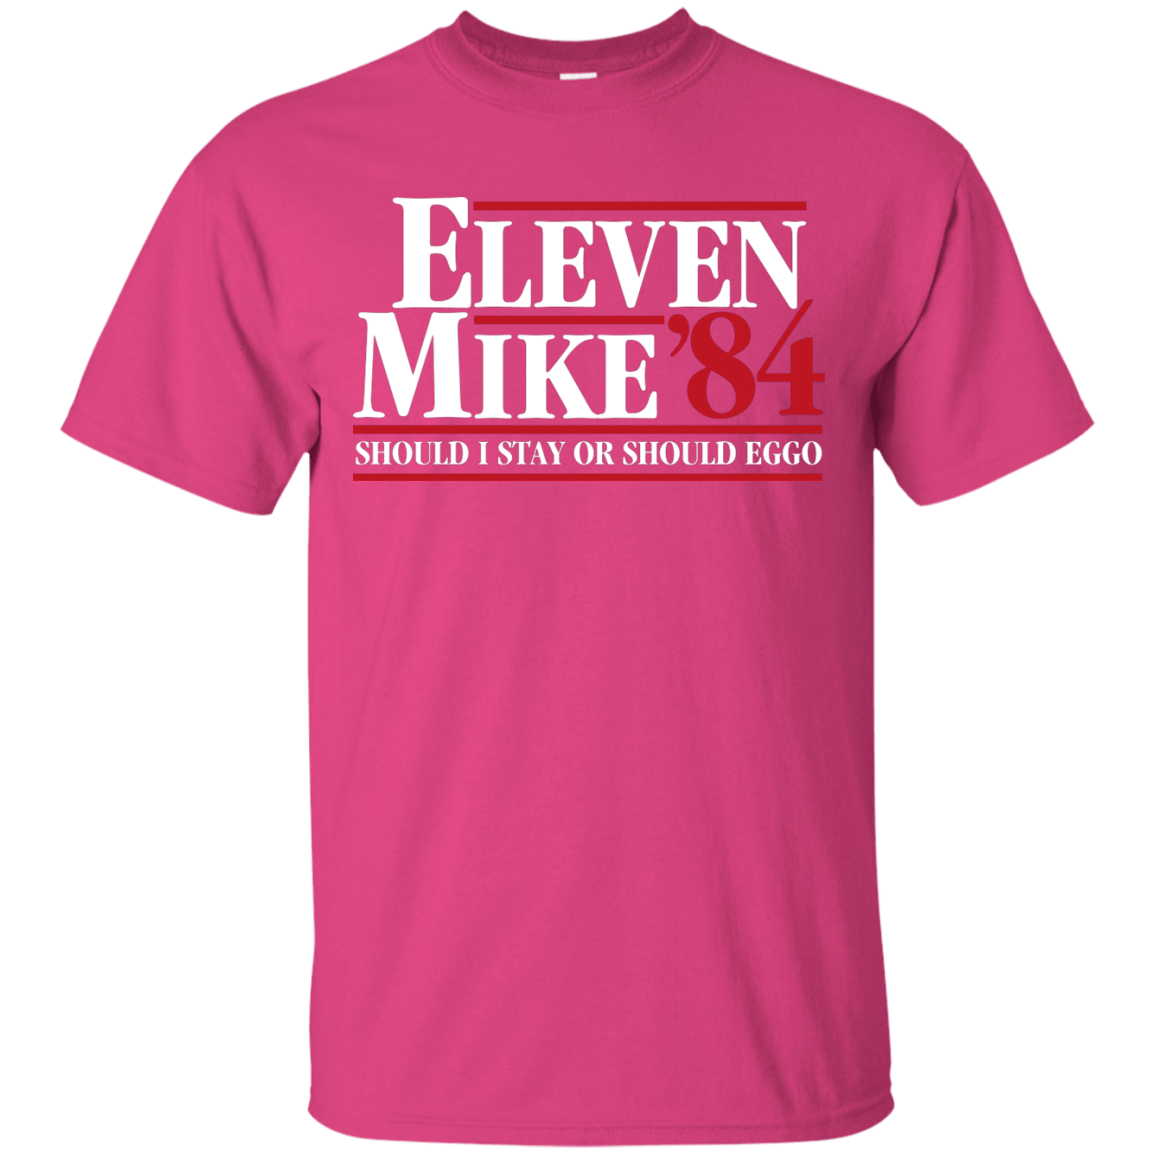 T-Shirts Heliconia / Small Eleven Mike 84 - Should I Stay or Should Eggo T-Shirt